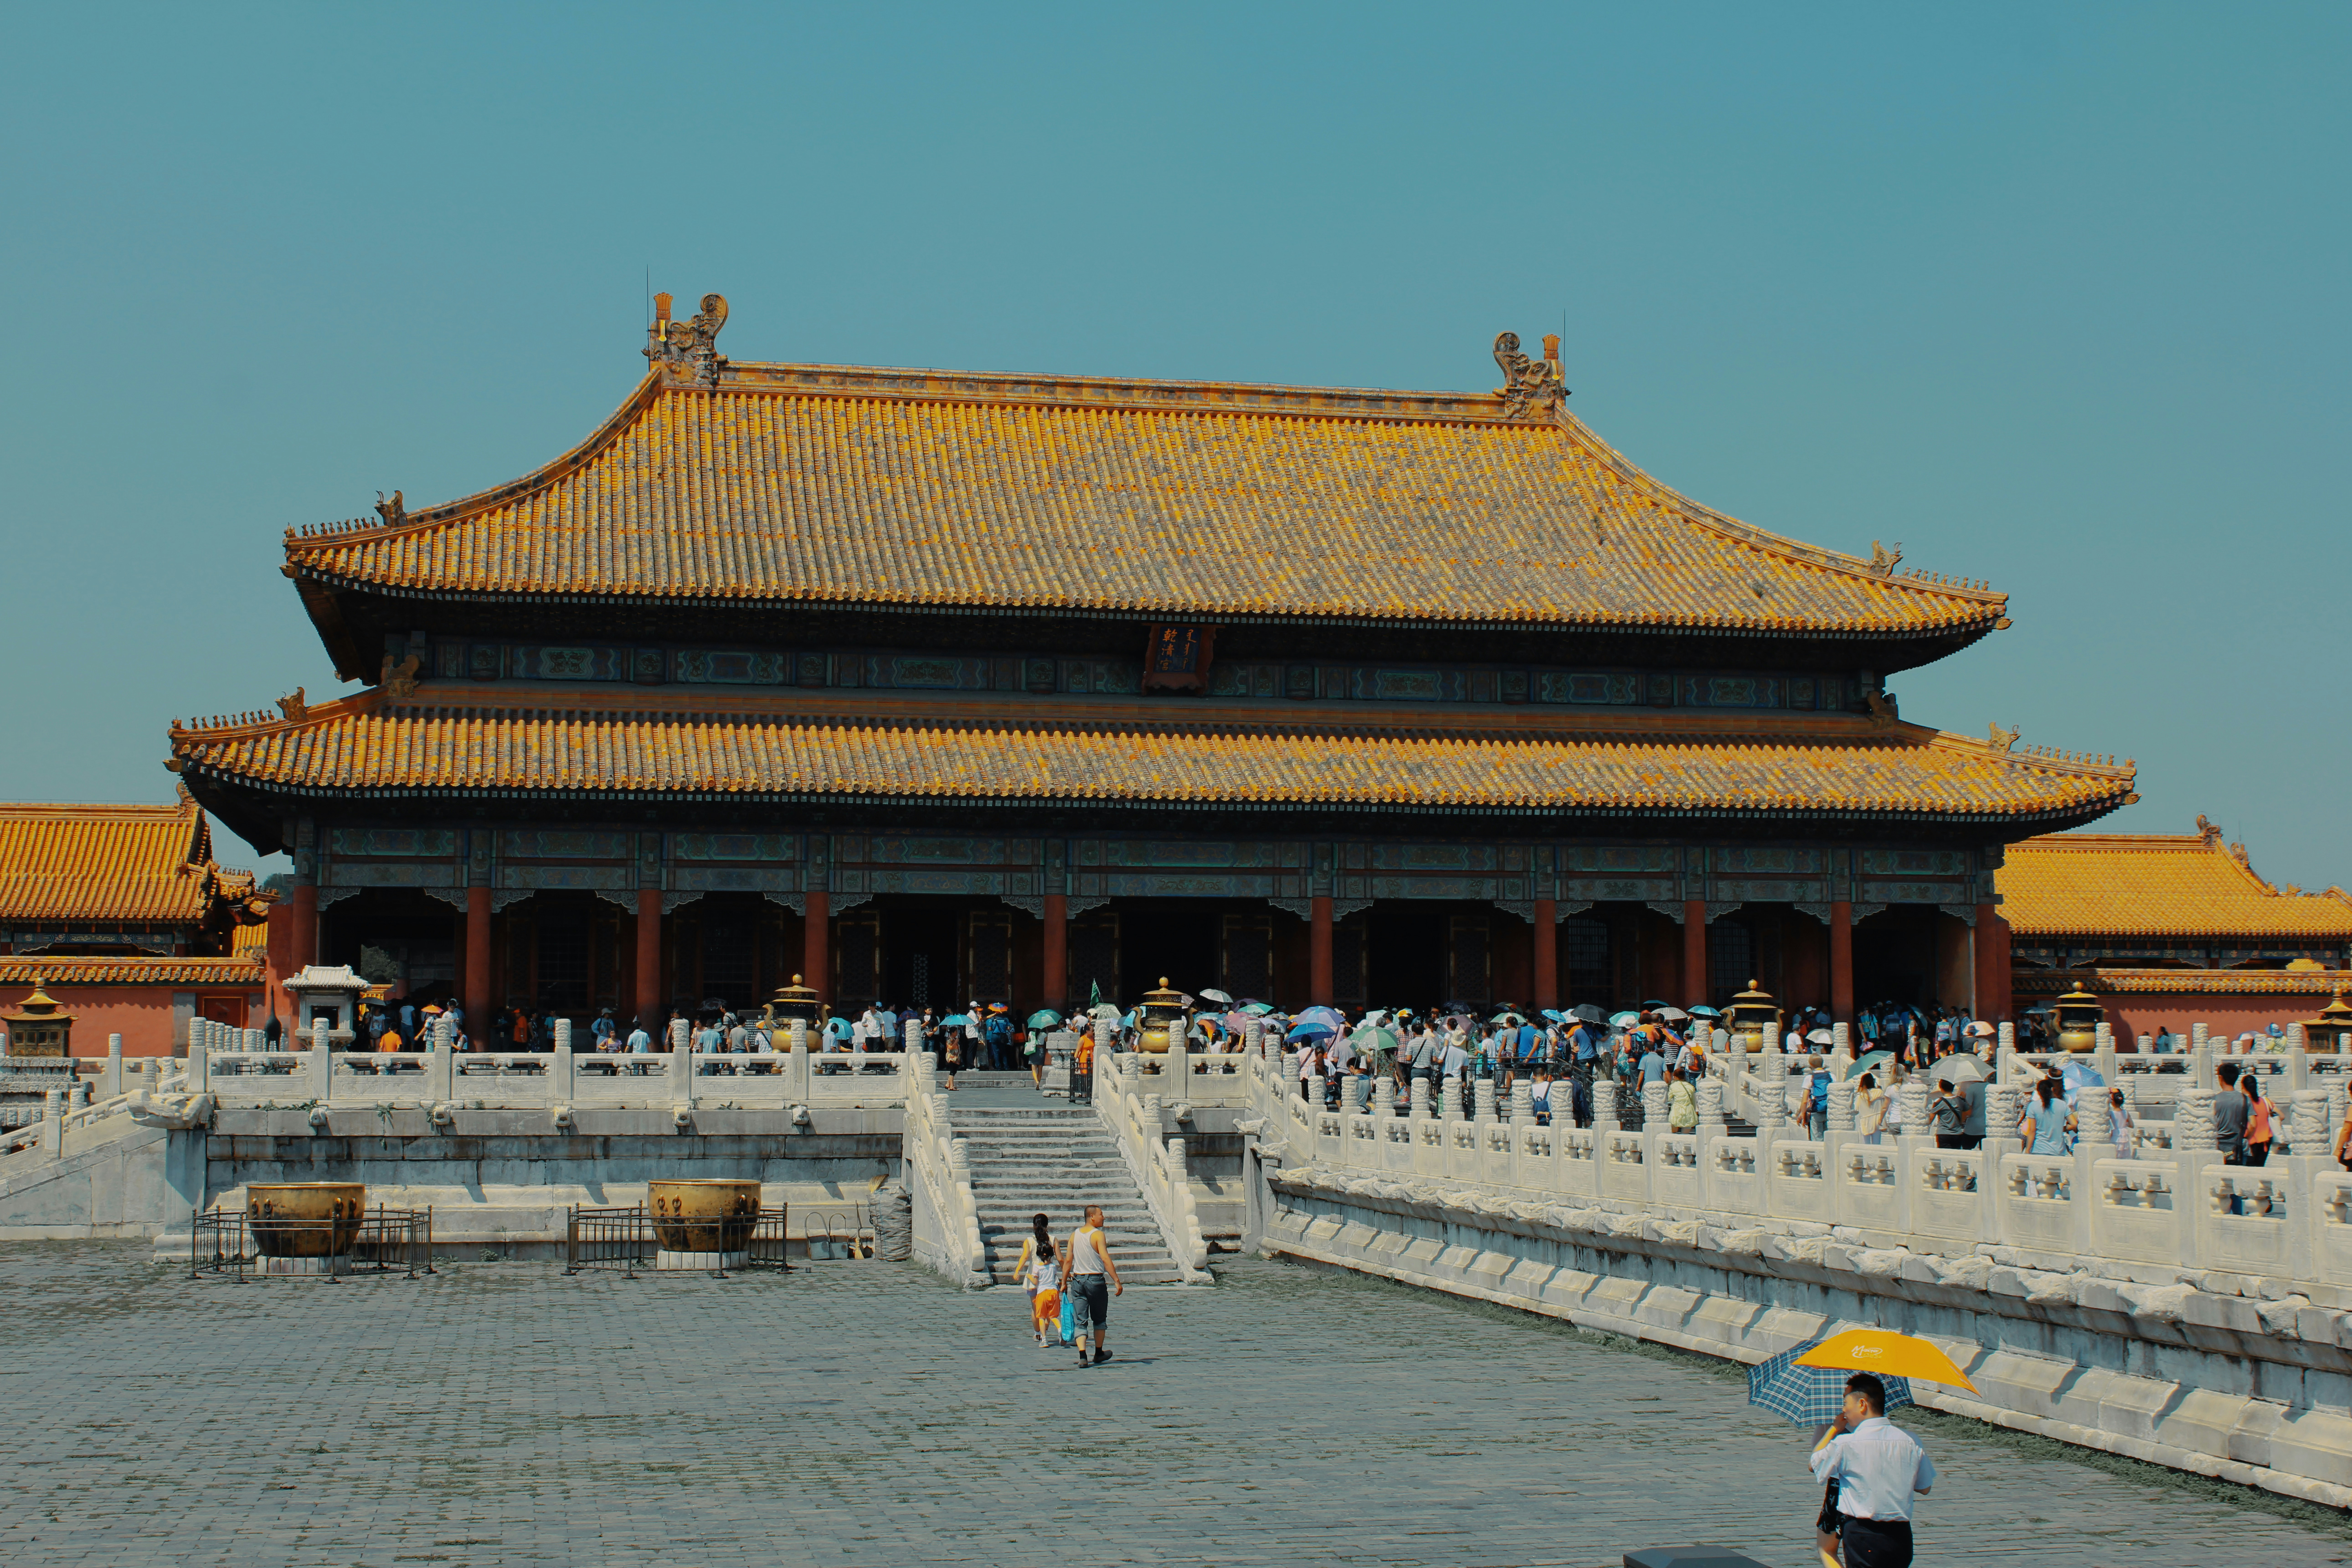 Aug 9th, 2013: Forbidden City Main Building - Travel Throwback